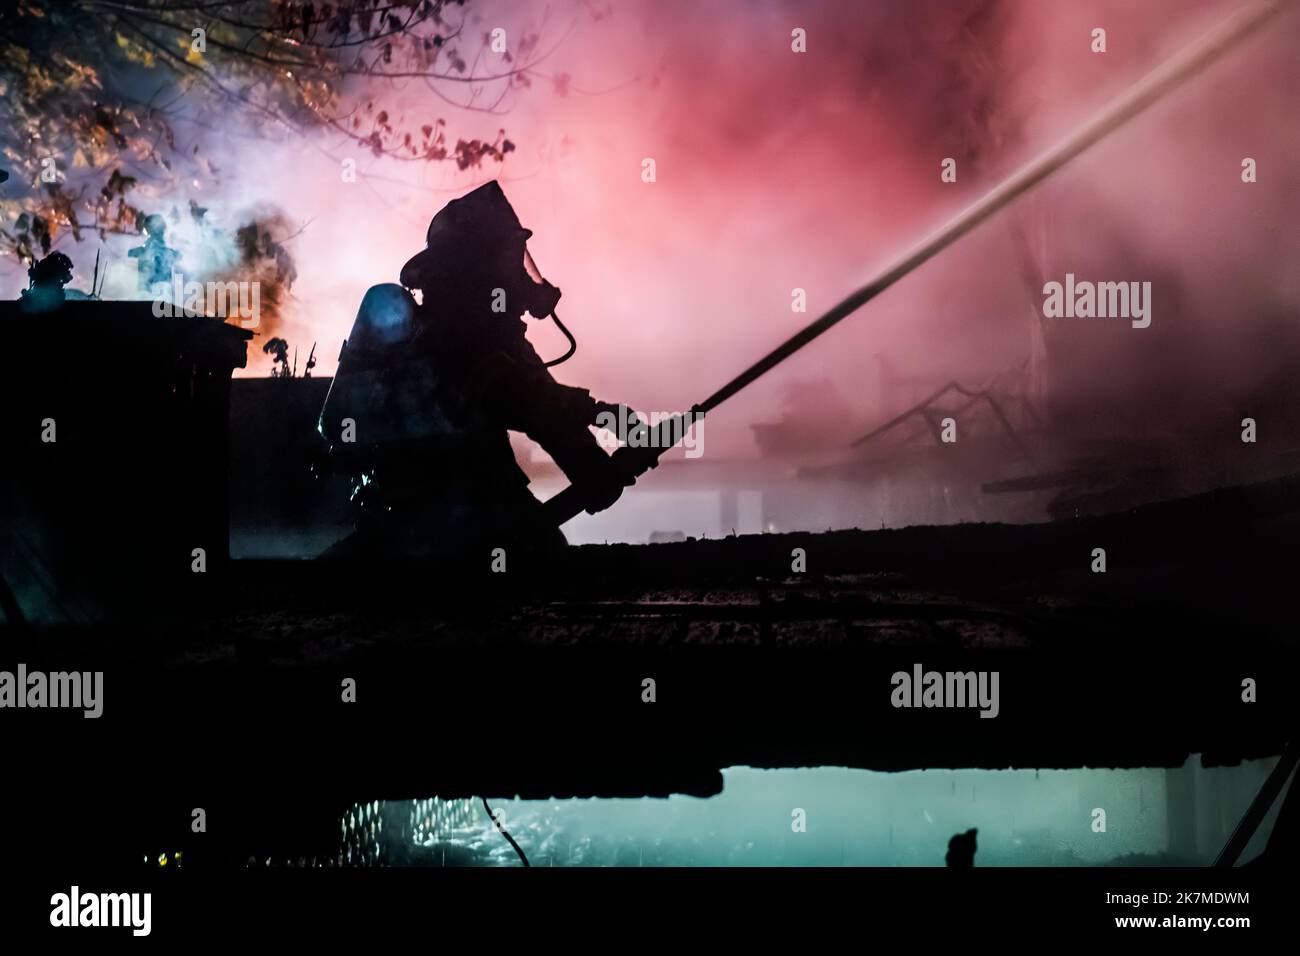 A firefighter operating a hose is silhouetted in the smoke as at 2:43 a.m. on Sunday, October 28th, 2018, members of the Springs Fire Department respo Stock Photo